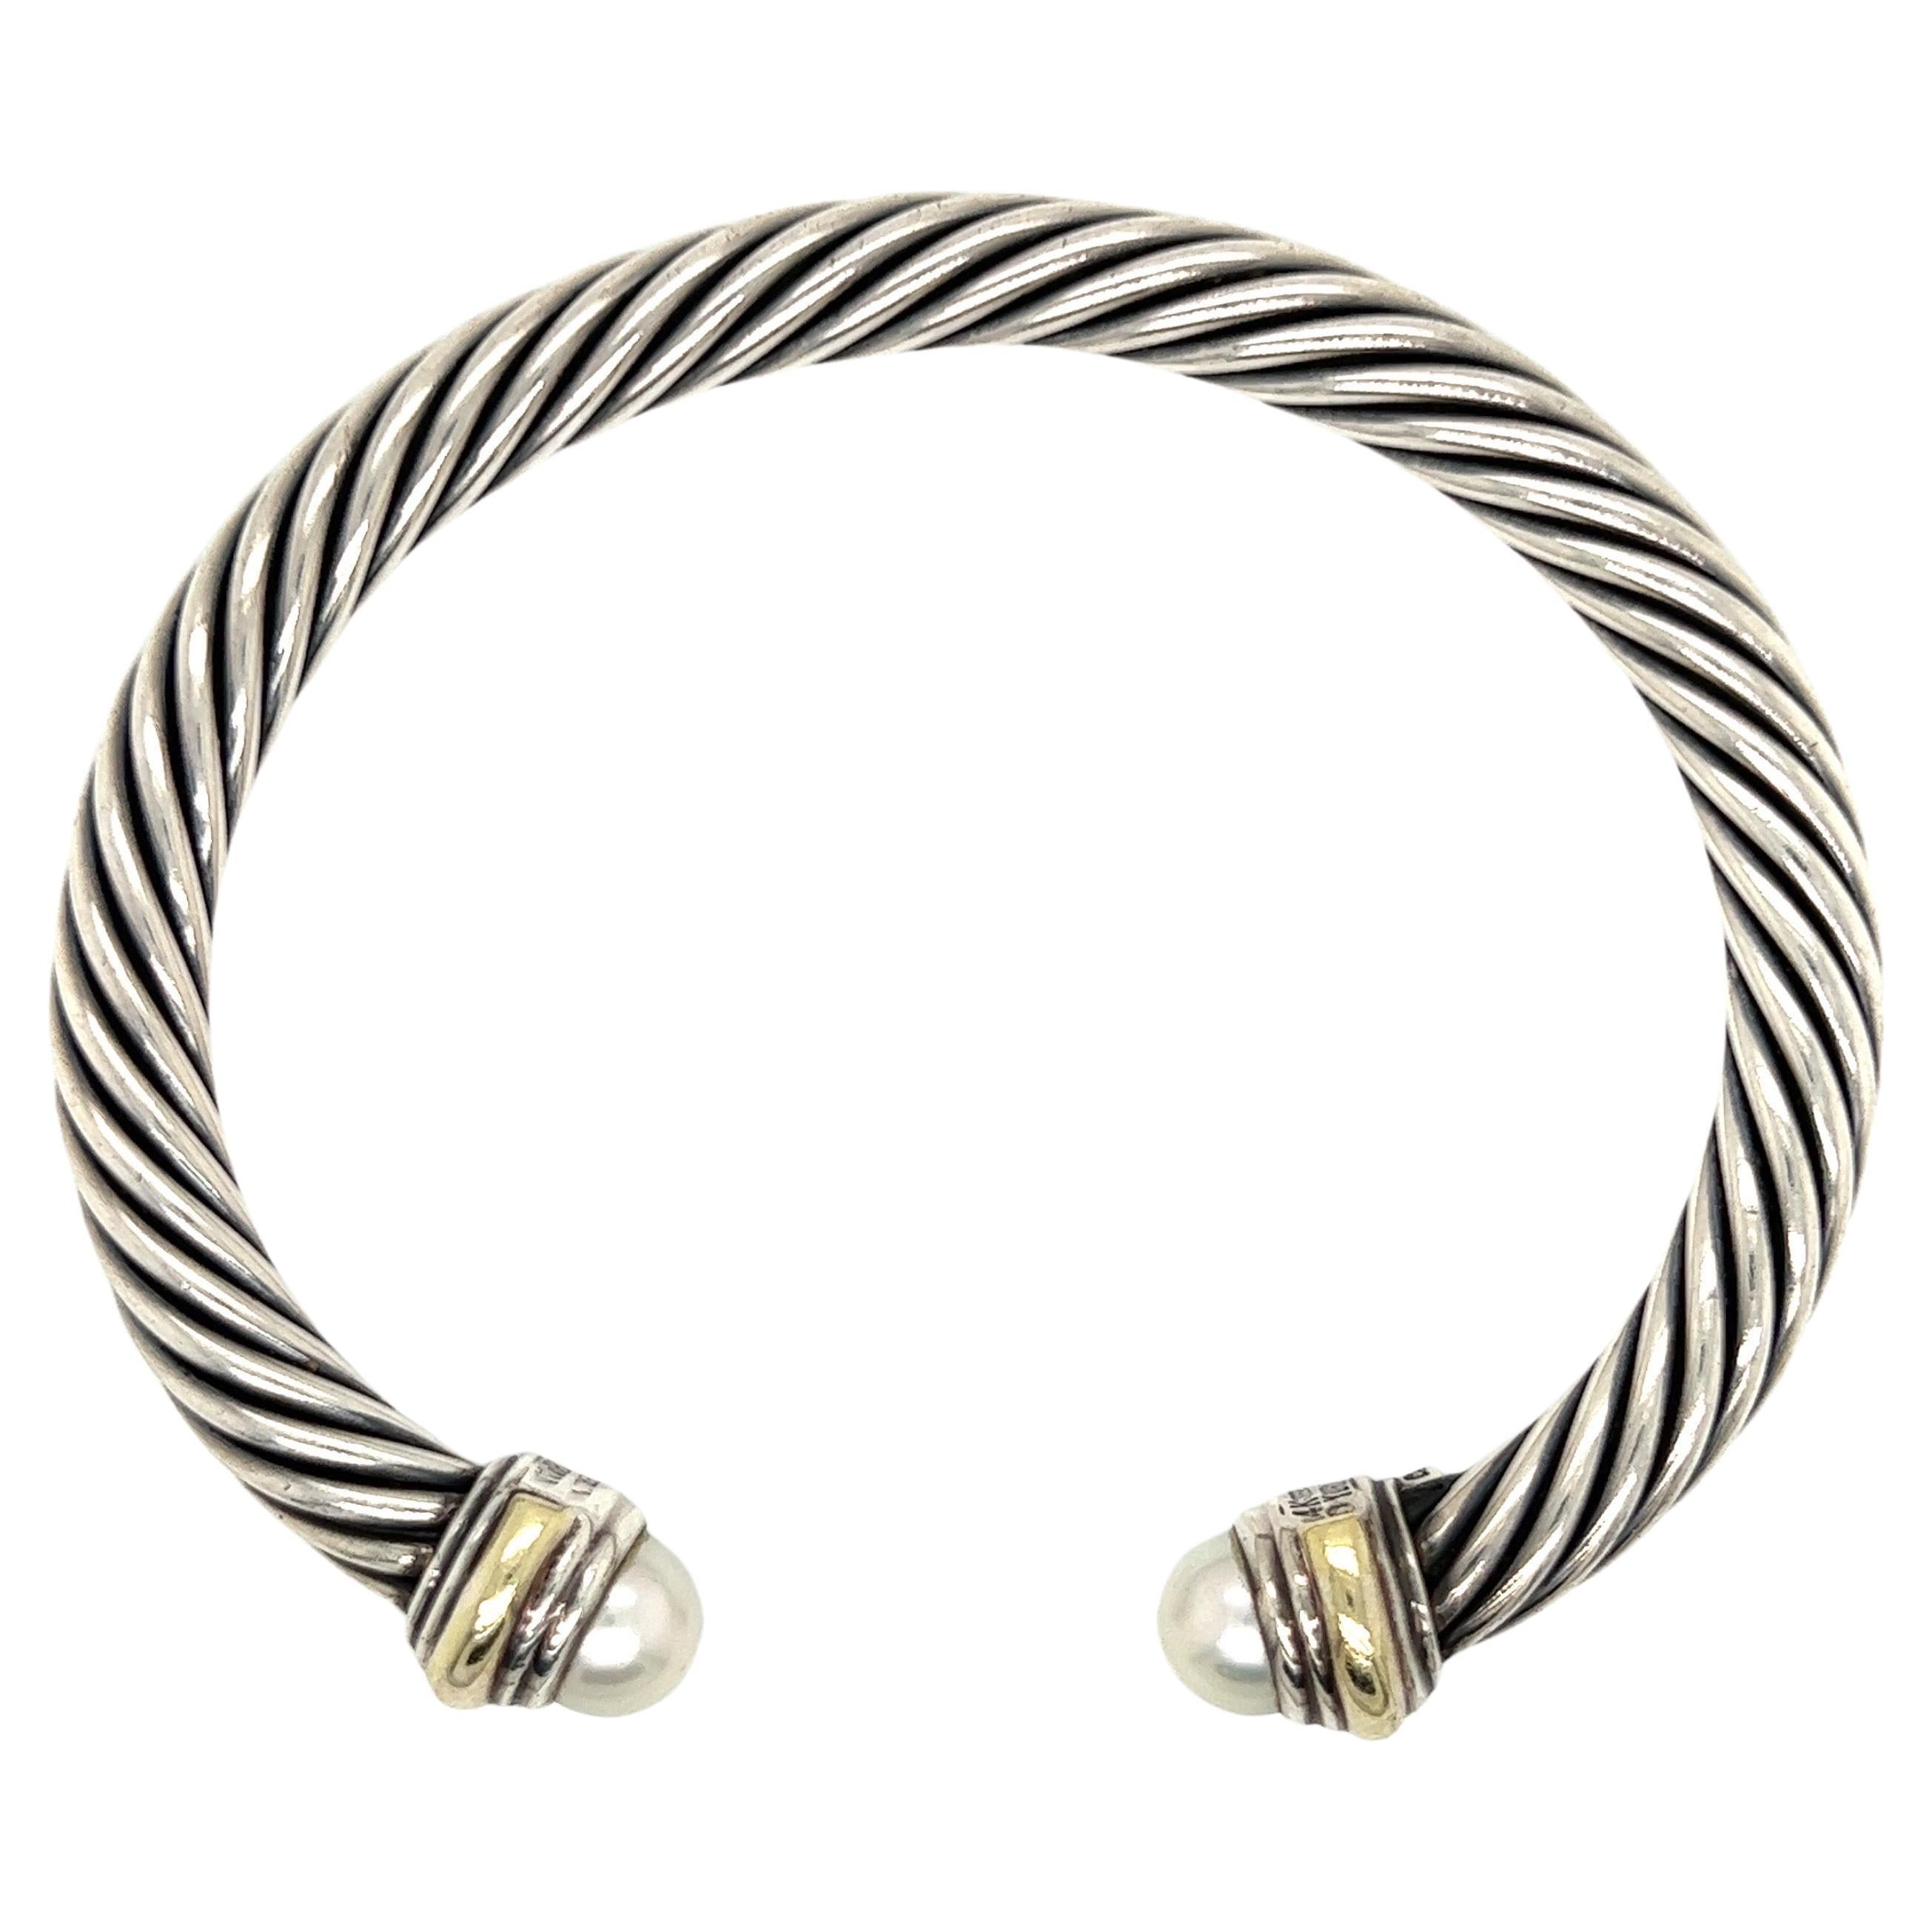 14k Yellow gold with silver cable bangle bracelet.

This David Yurman cable bracelet is composed with both 14k yellow gold as well as silver which complements to the two pearls. This design has evolved over the last 30 years into what it is today.